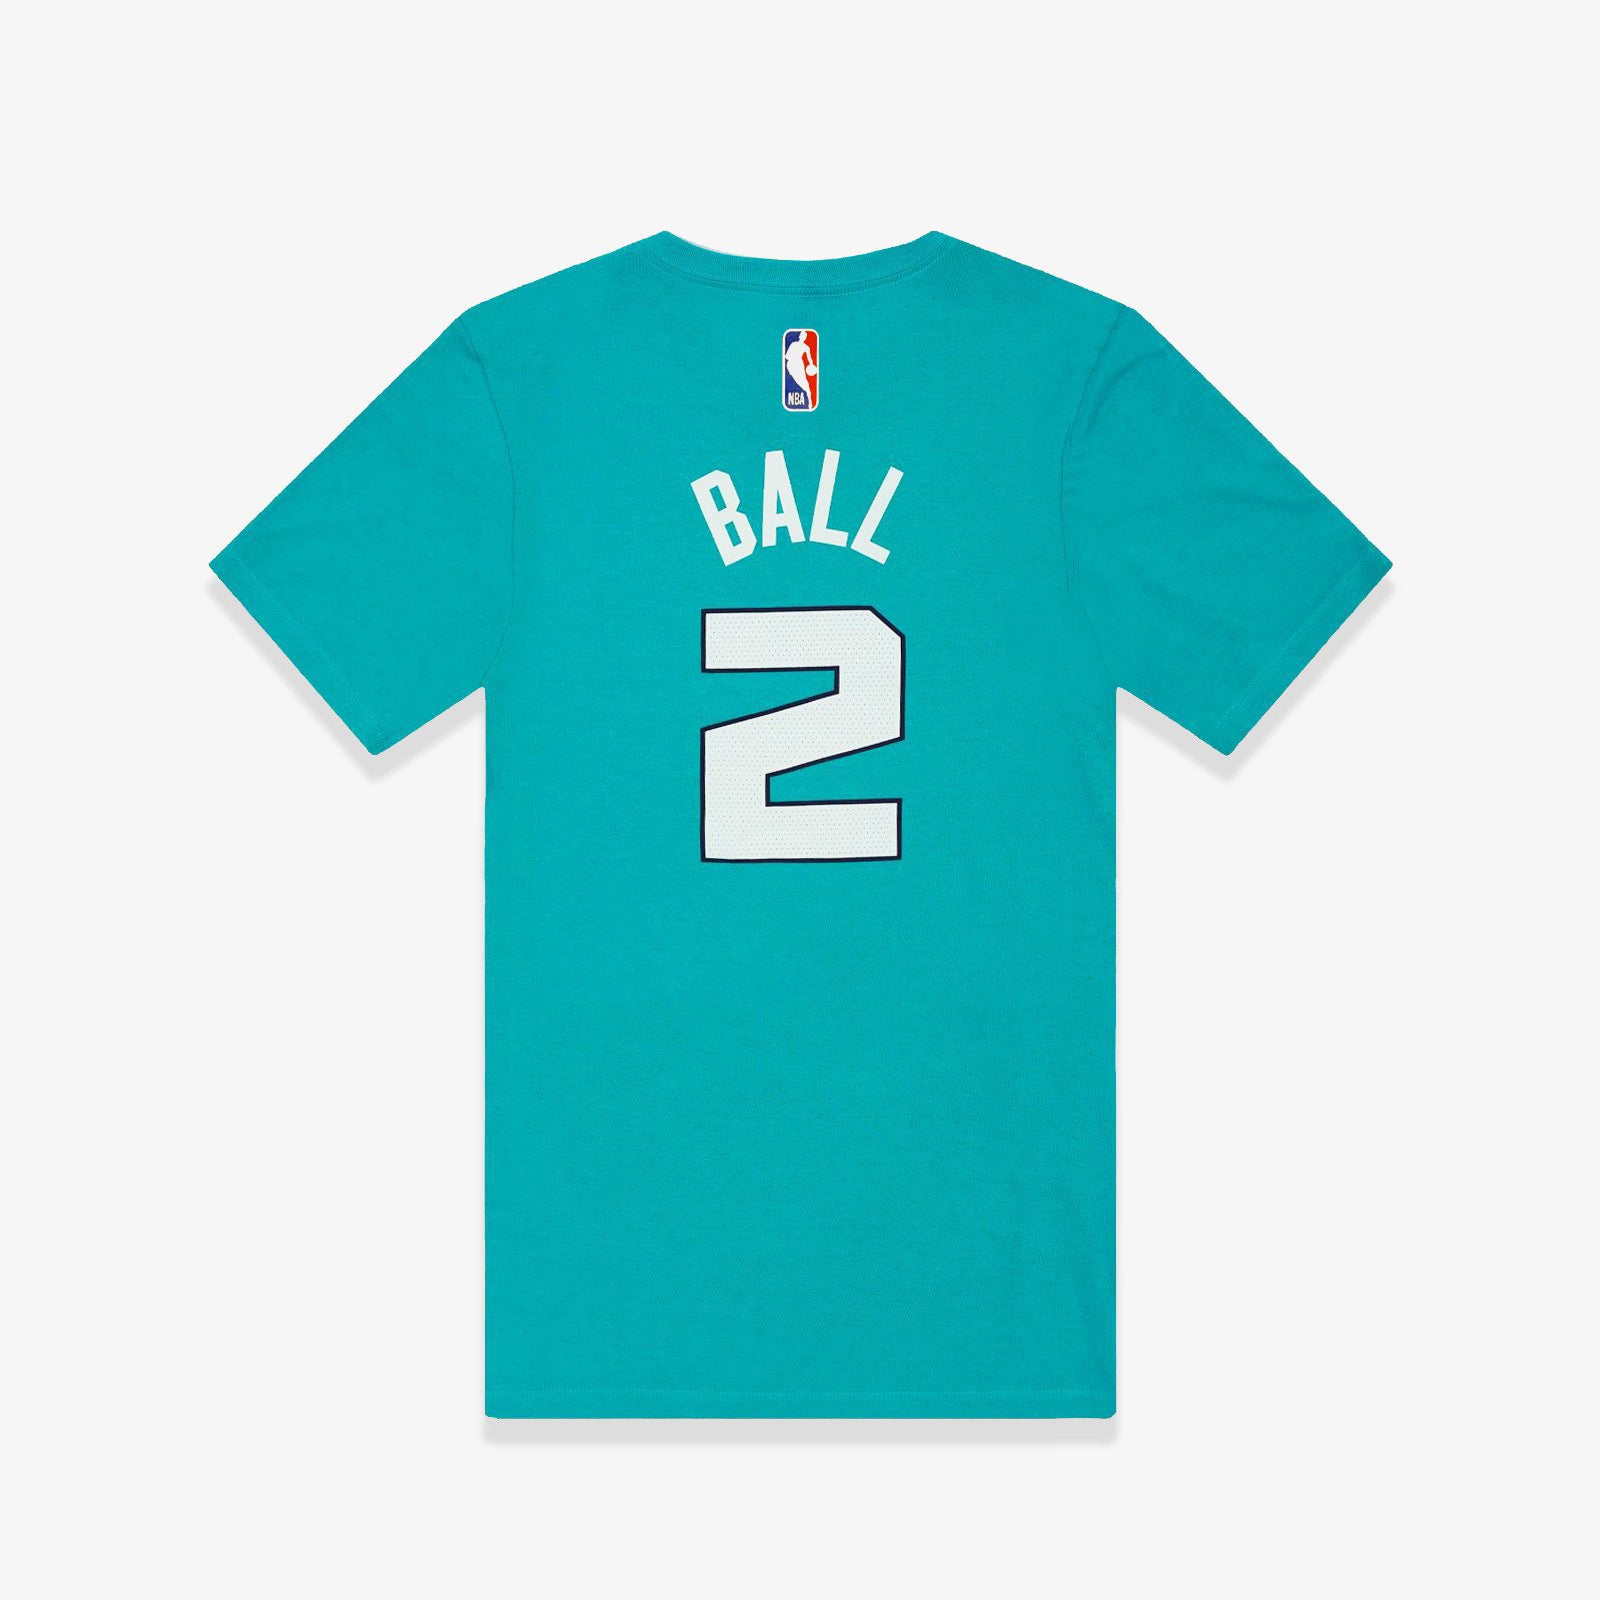 Official LaMelo Ball Charlotte Hornets Player Logo Vintage shirt - TypoTees